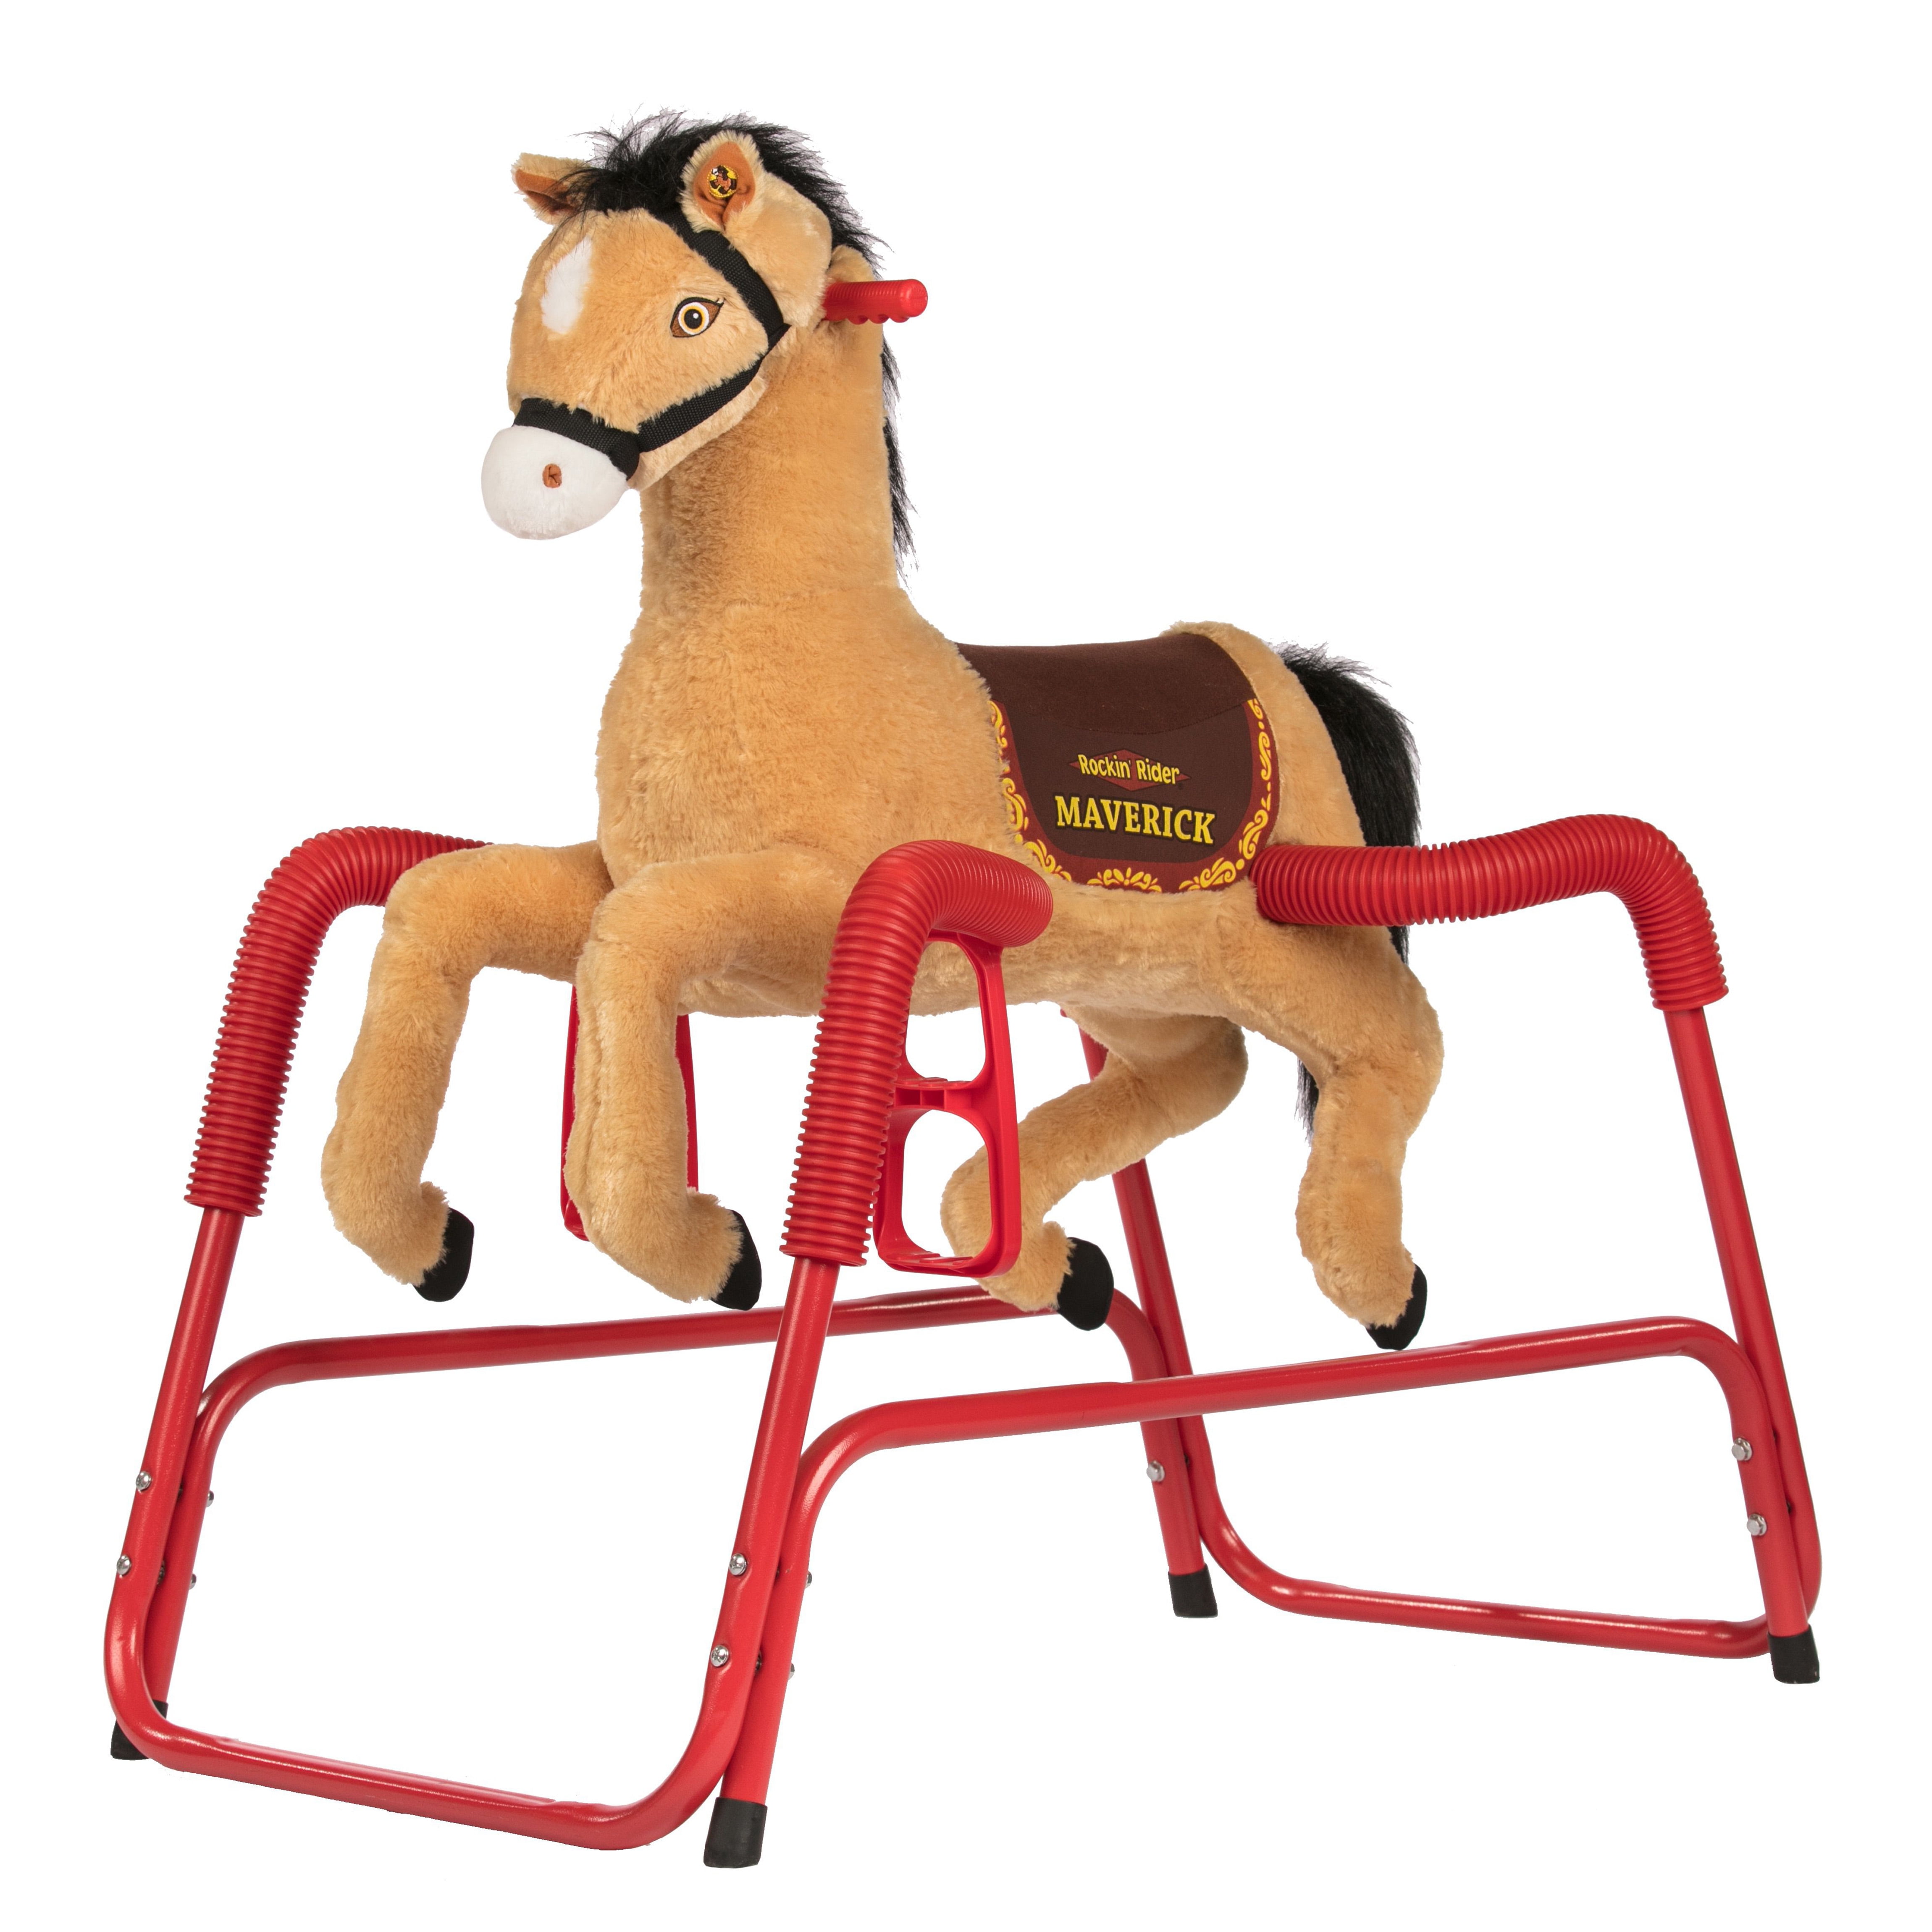 Spring Rocking Horse Plush Ride on Toy with Adjustable Foot Stirrups and Sounds